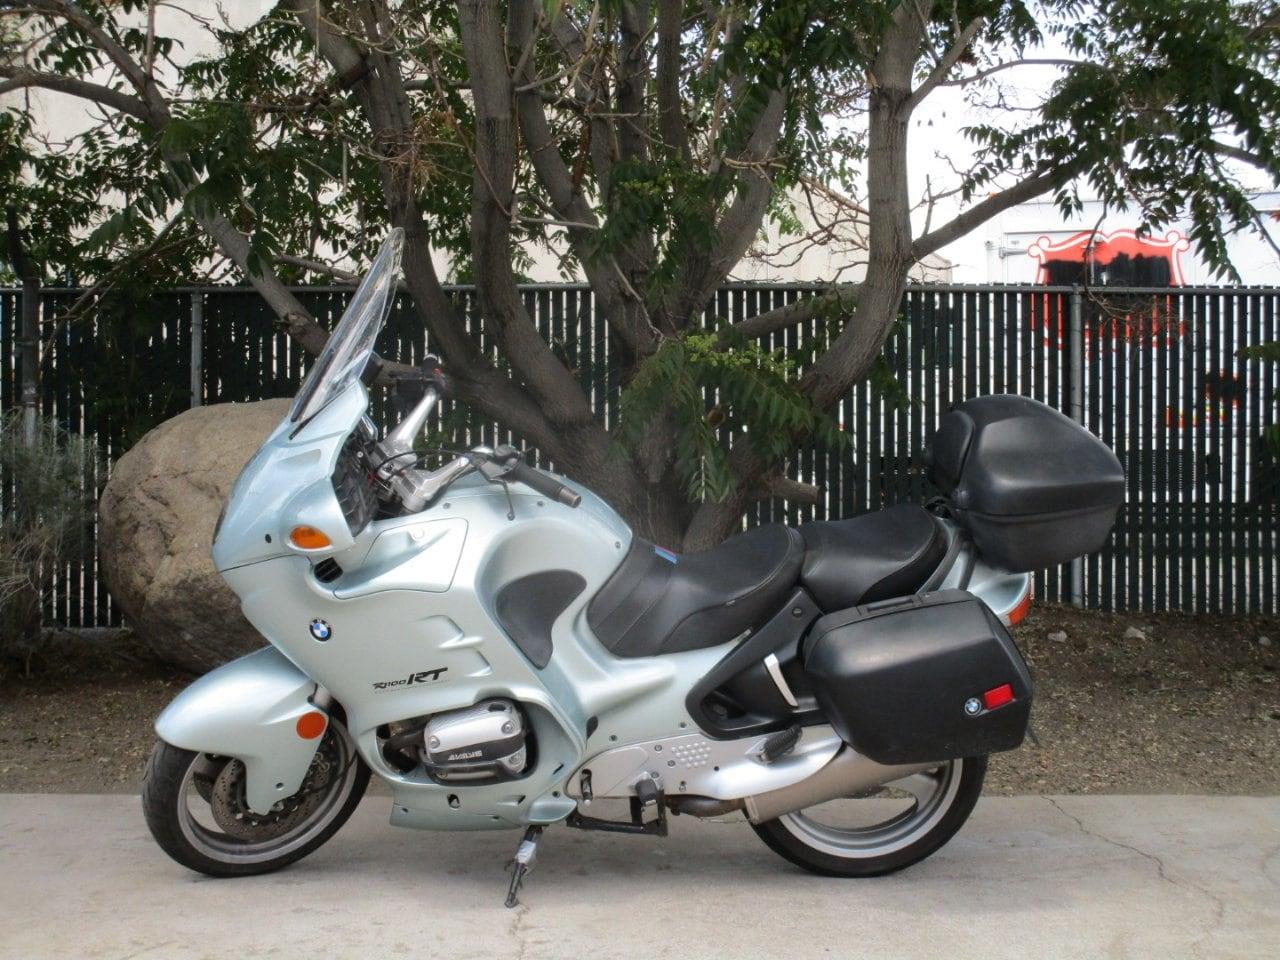 1996 BMW Motorcycle for Sale | ClassicCars.com | CC-1338410